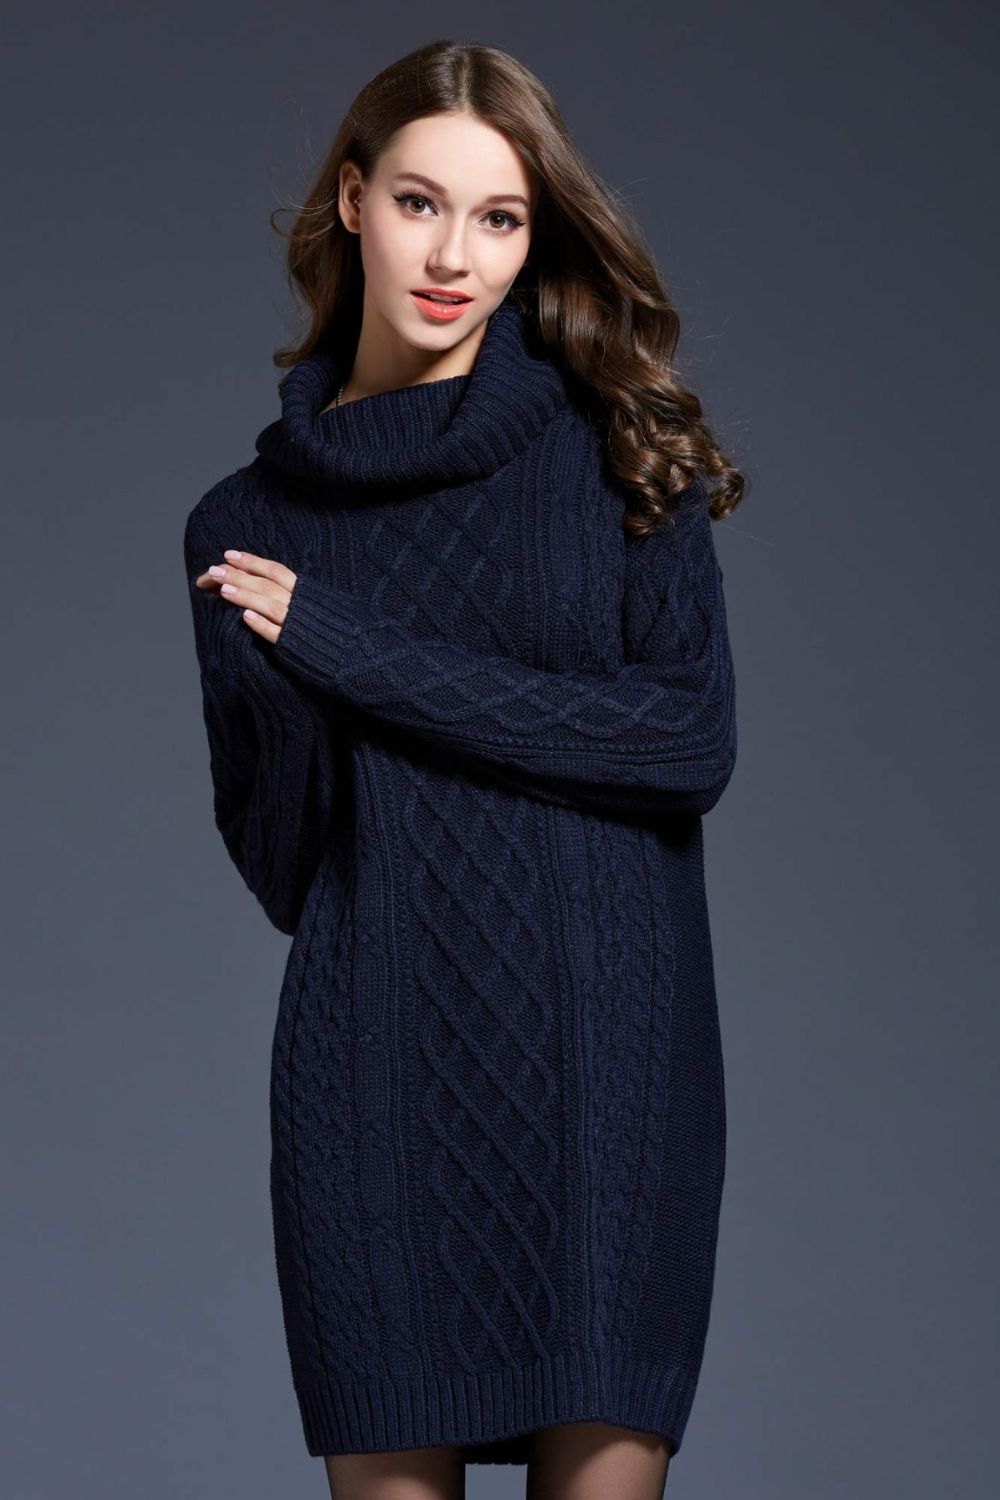 Women’s - Woven Right Full Size Mixed Knit Cowl Neck Dropped Shoulder Sweater Dress